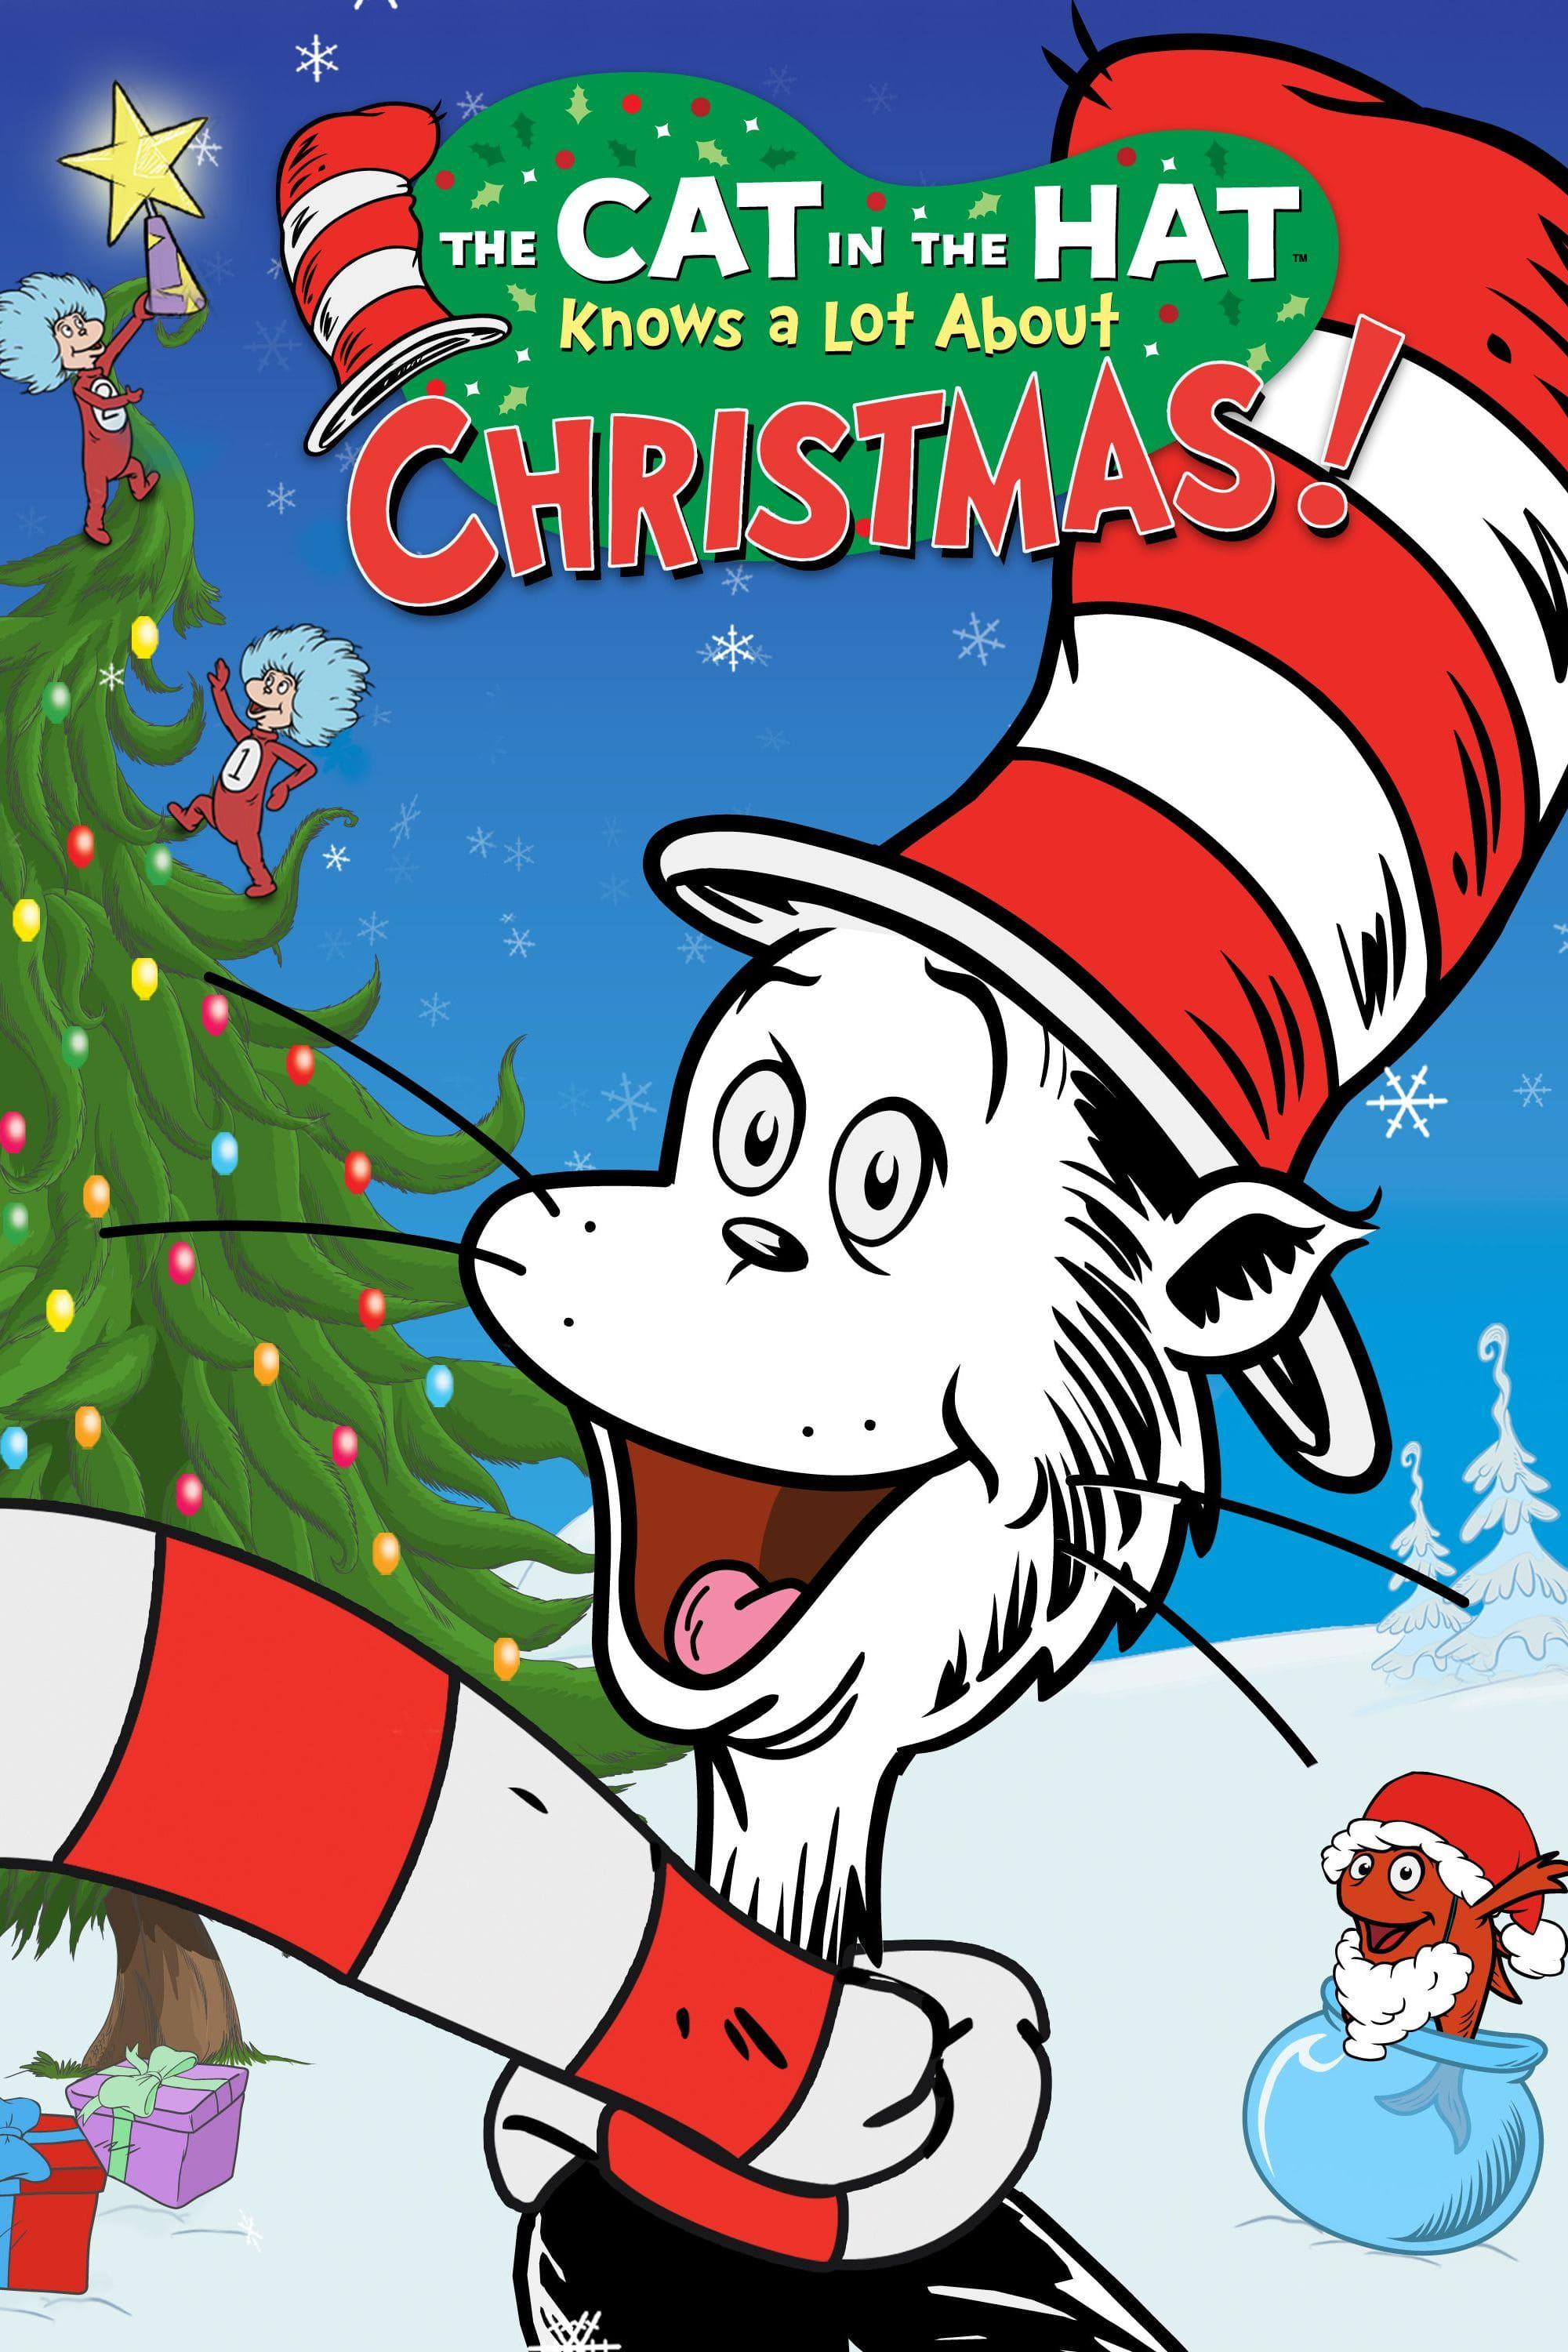 The Cat in the Hat Knows a Lot About Christmas! poster